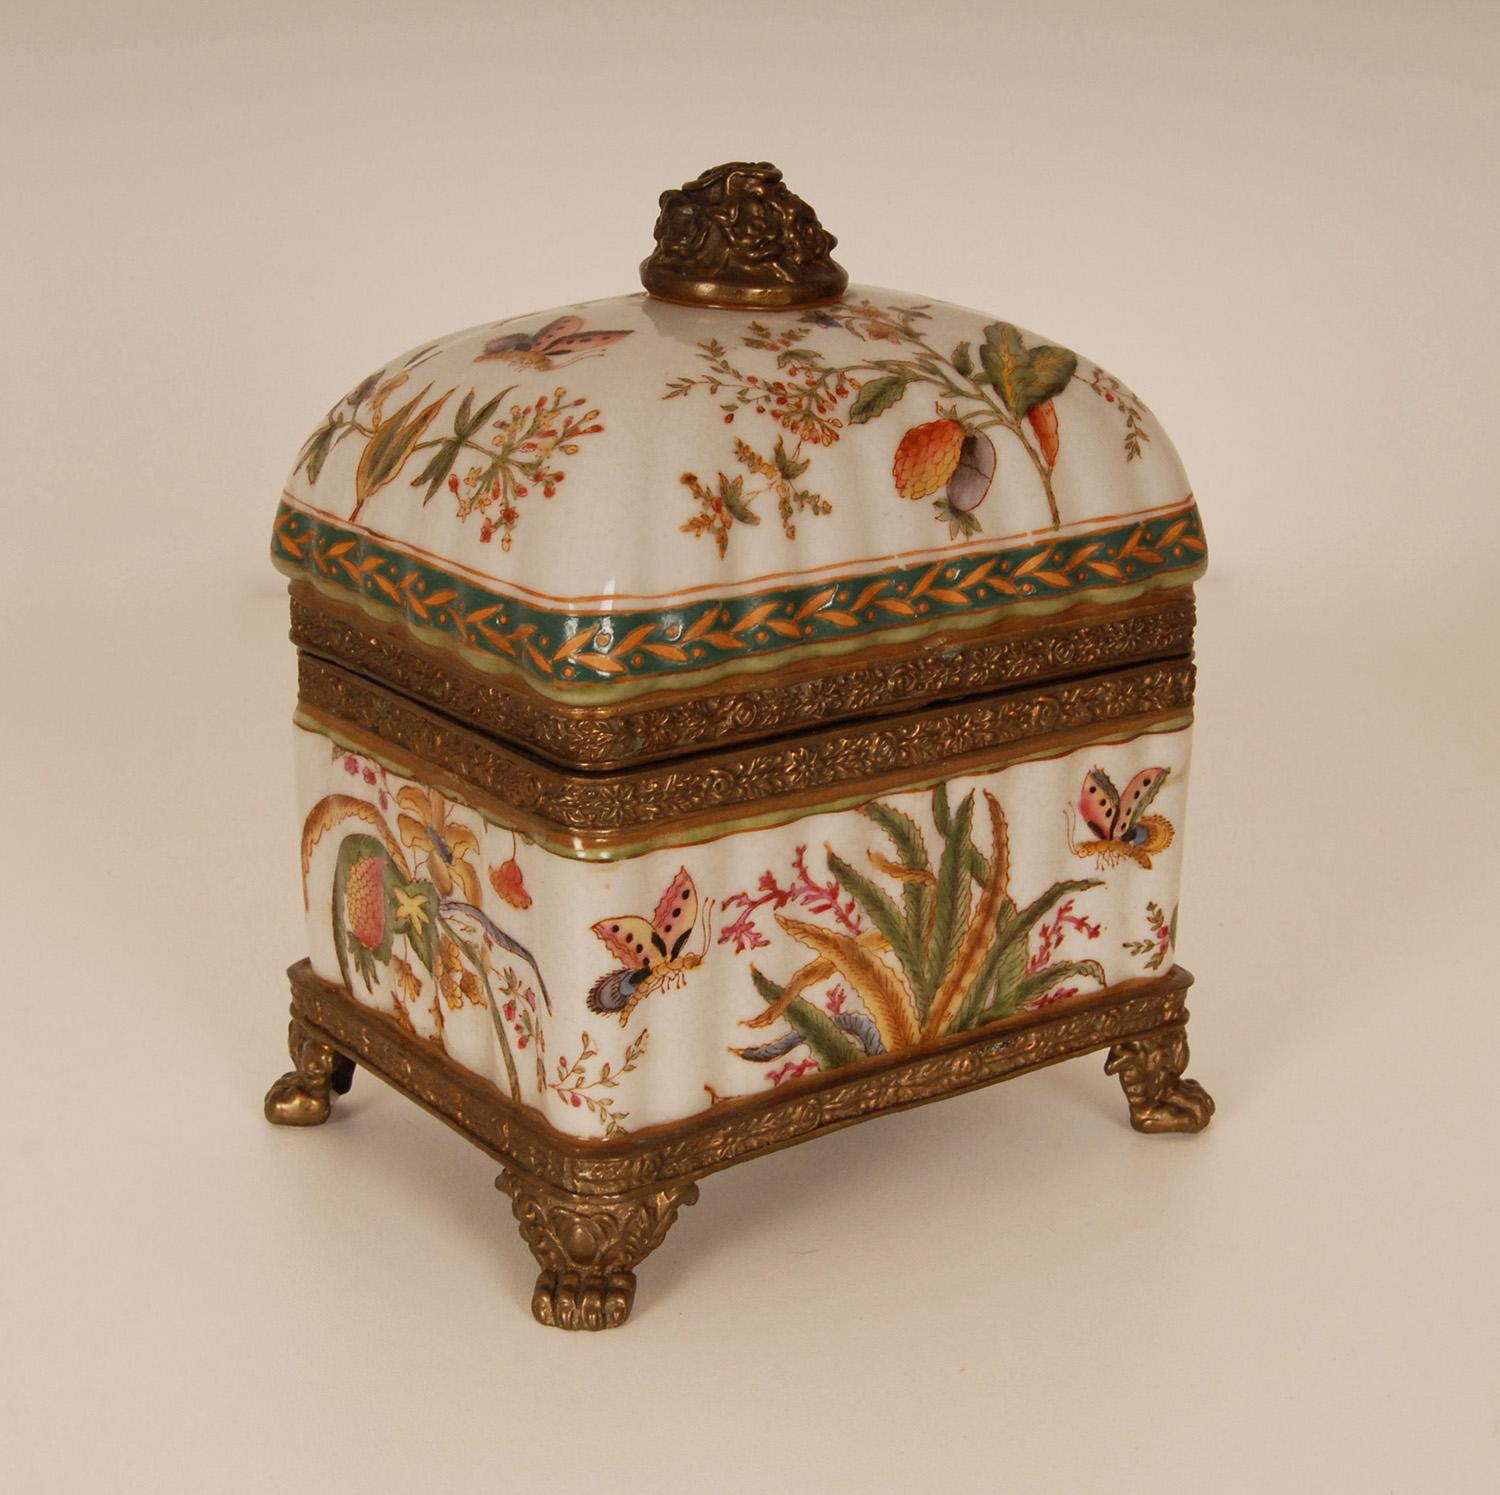 Porcelain bronze mounted box, Art Nouveau style
Made of hand-painted crackled, glazed high quality bronze mounted porcelain. Signed on the bottom. 
An all over polychrome floral decoration with butterflies, with a bronze stand on lion claw feet and